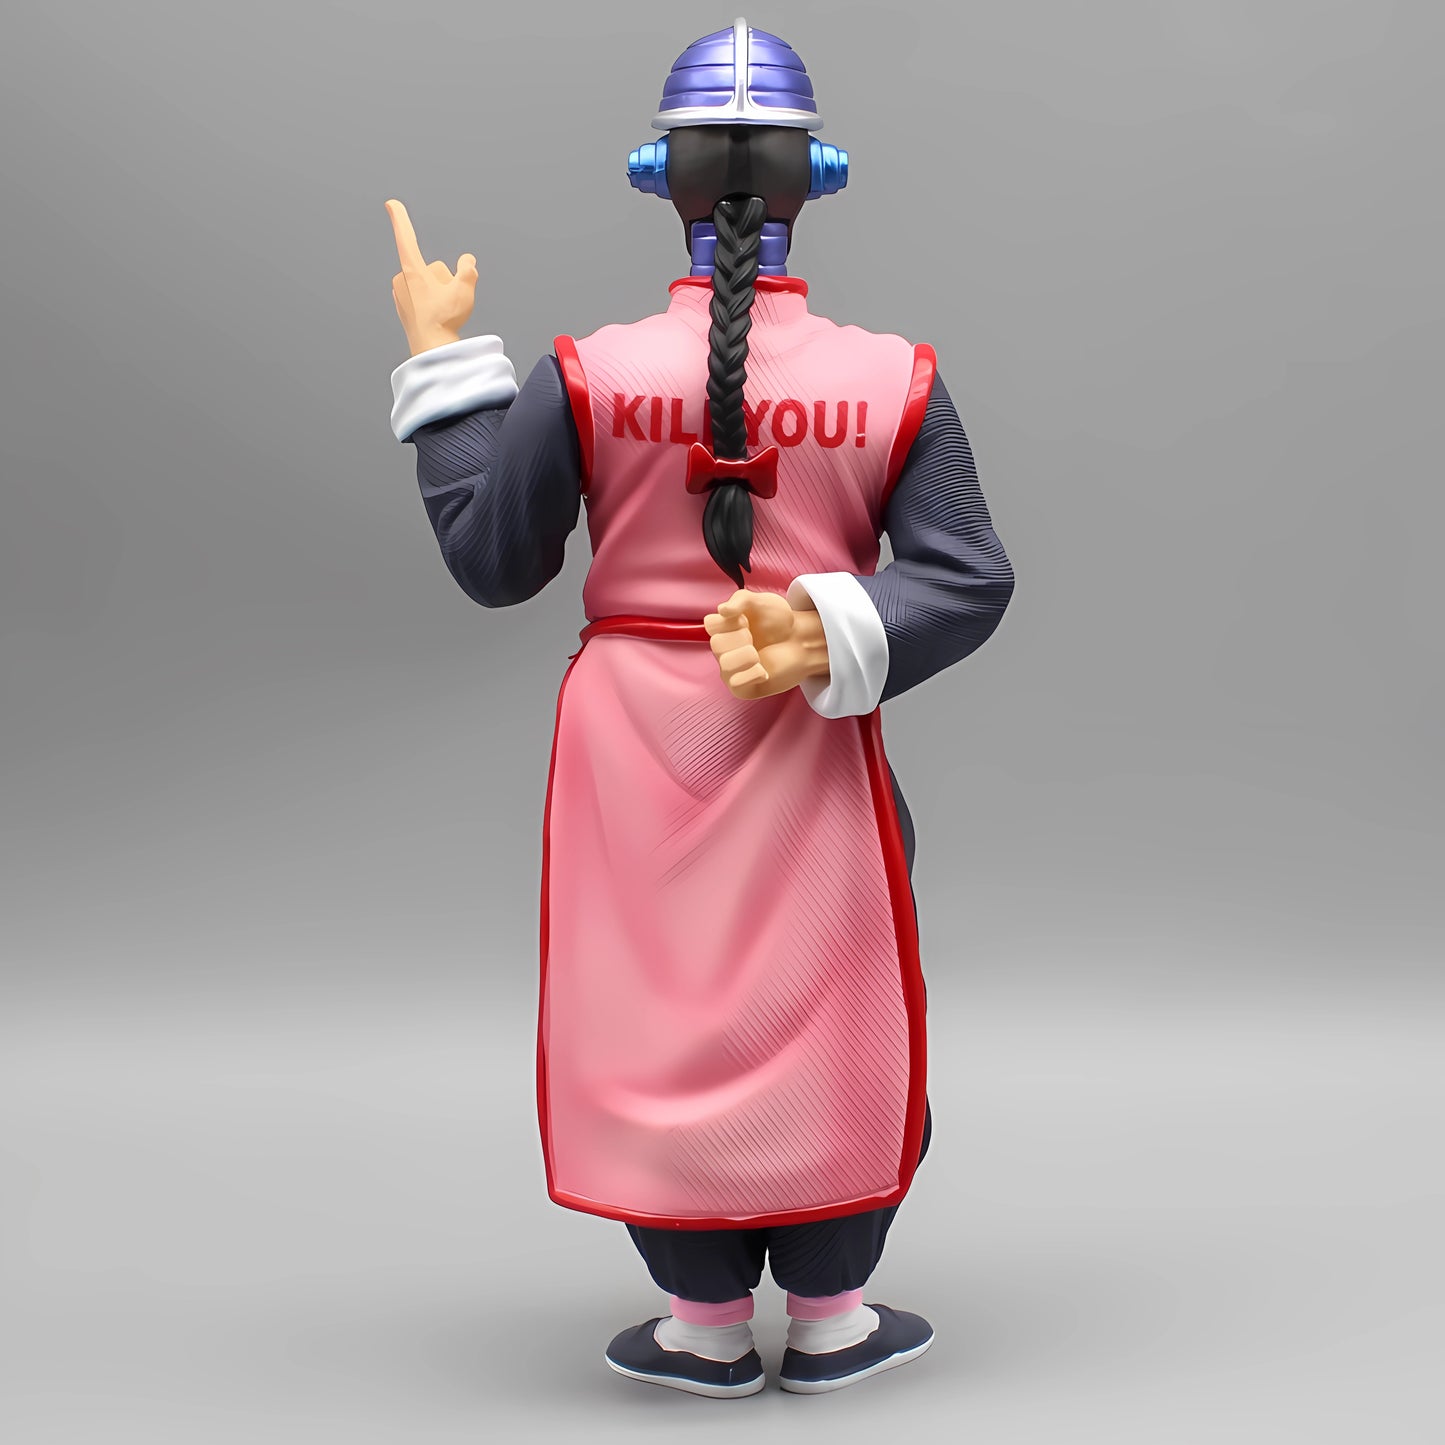 Rear view of the Tao Pai Pai figure with text 'KILL YOU!' on the back of his outfit, gesturing menacingly over his shoulder, presented against a neutral gray background.